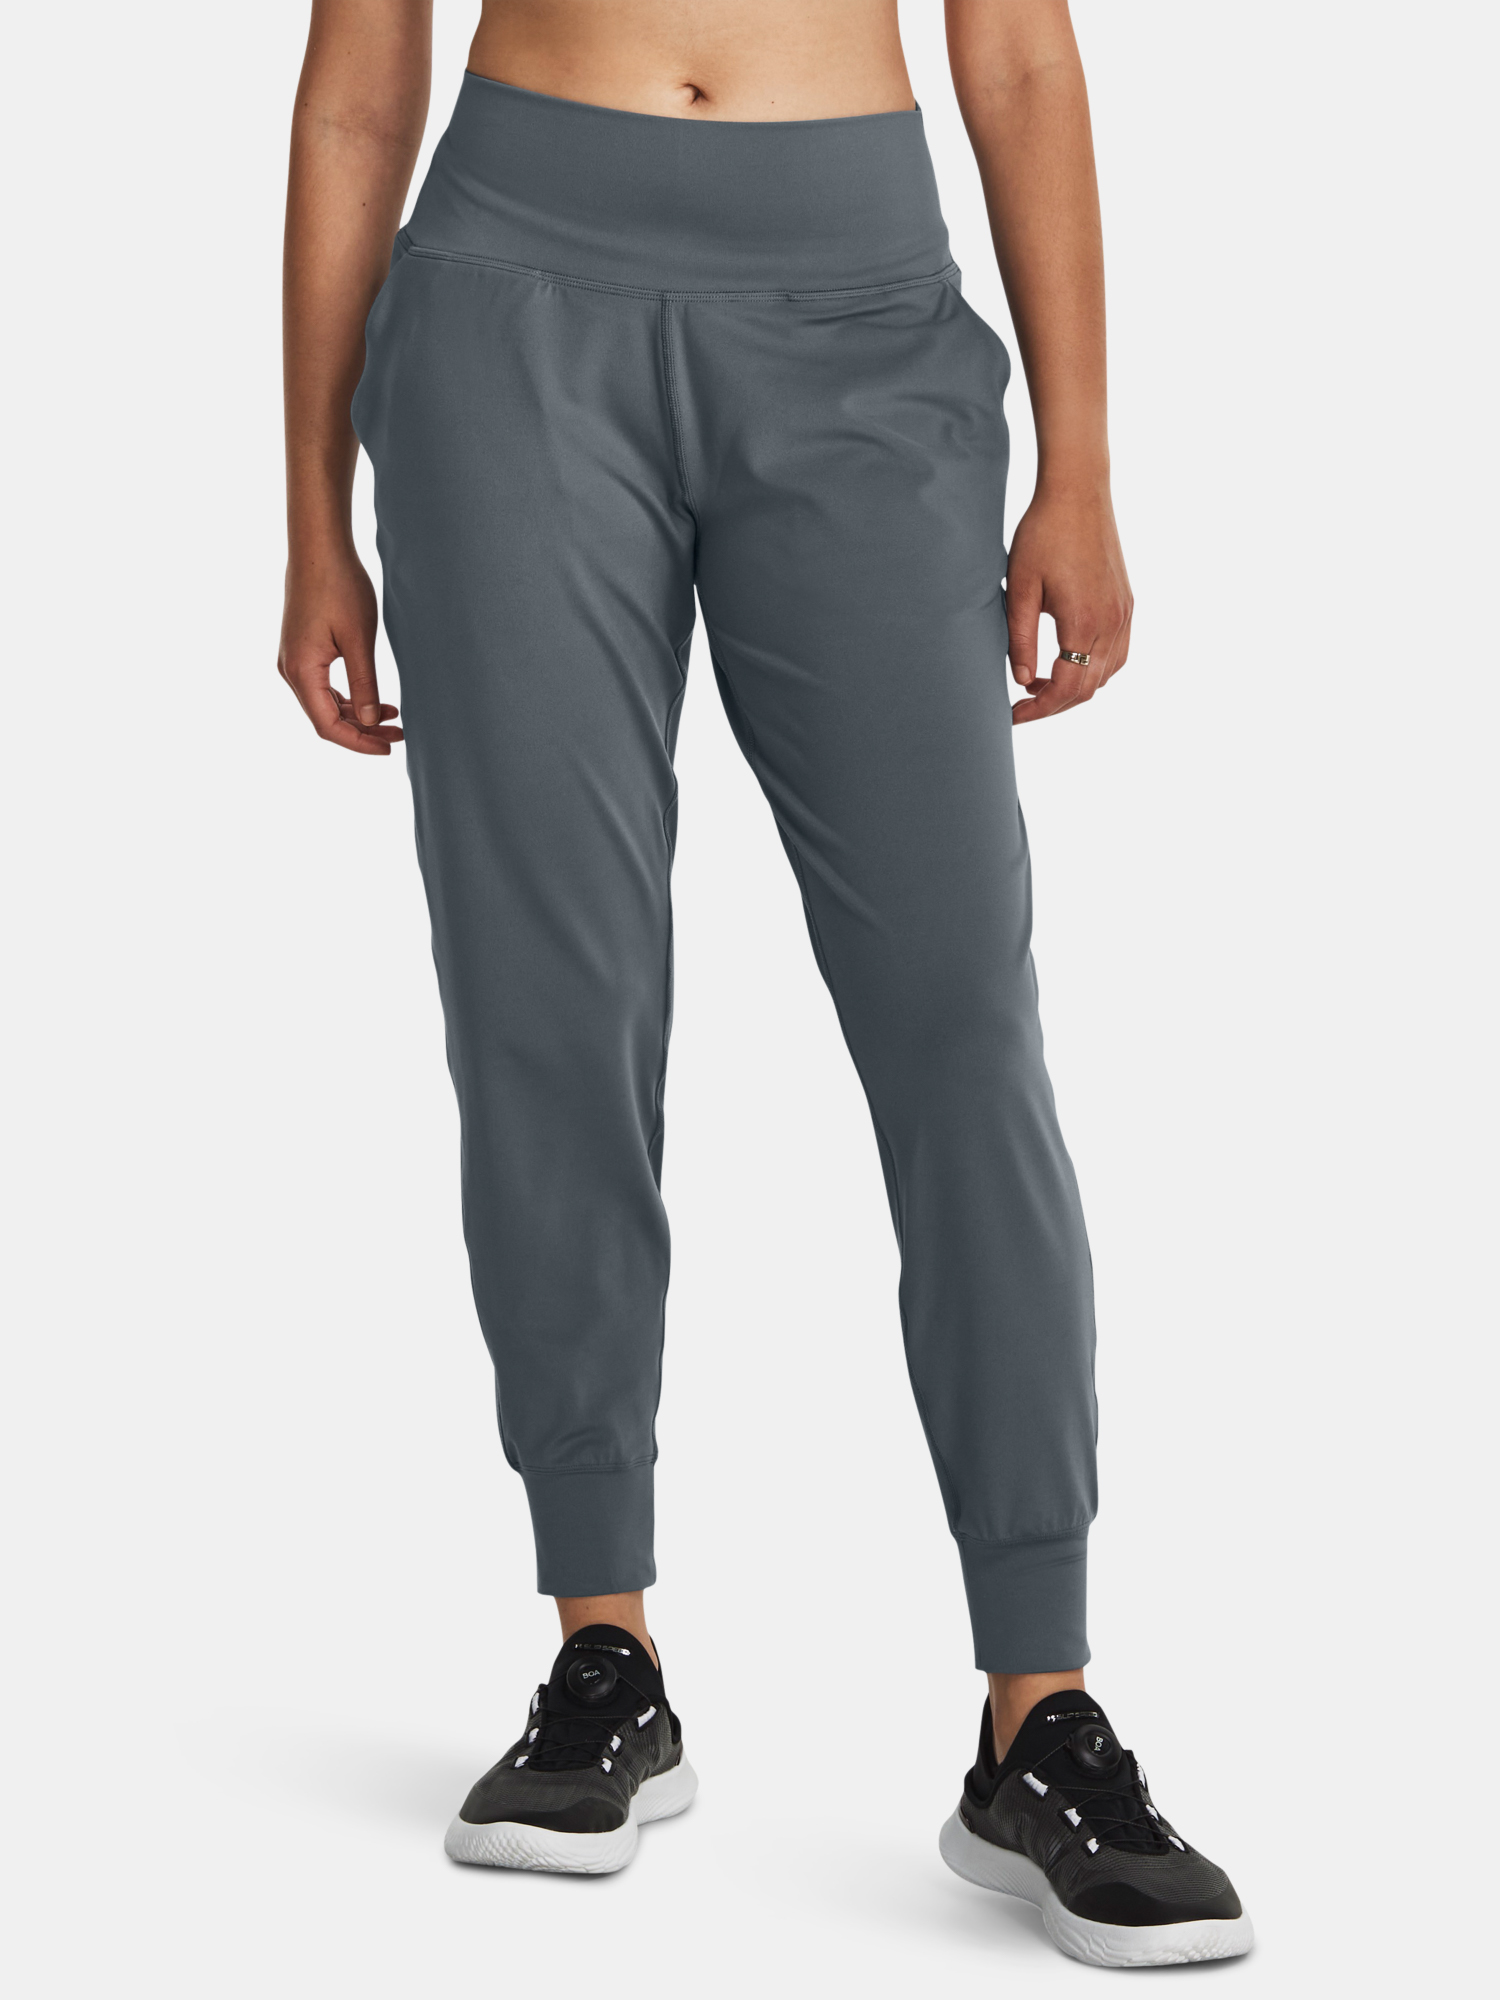 Under Armour Sweatpants Meridian Jogger-GRY - Women